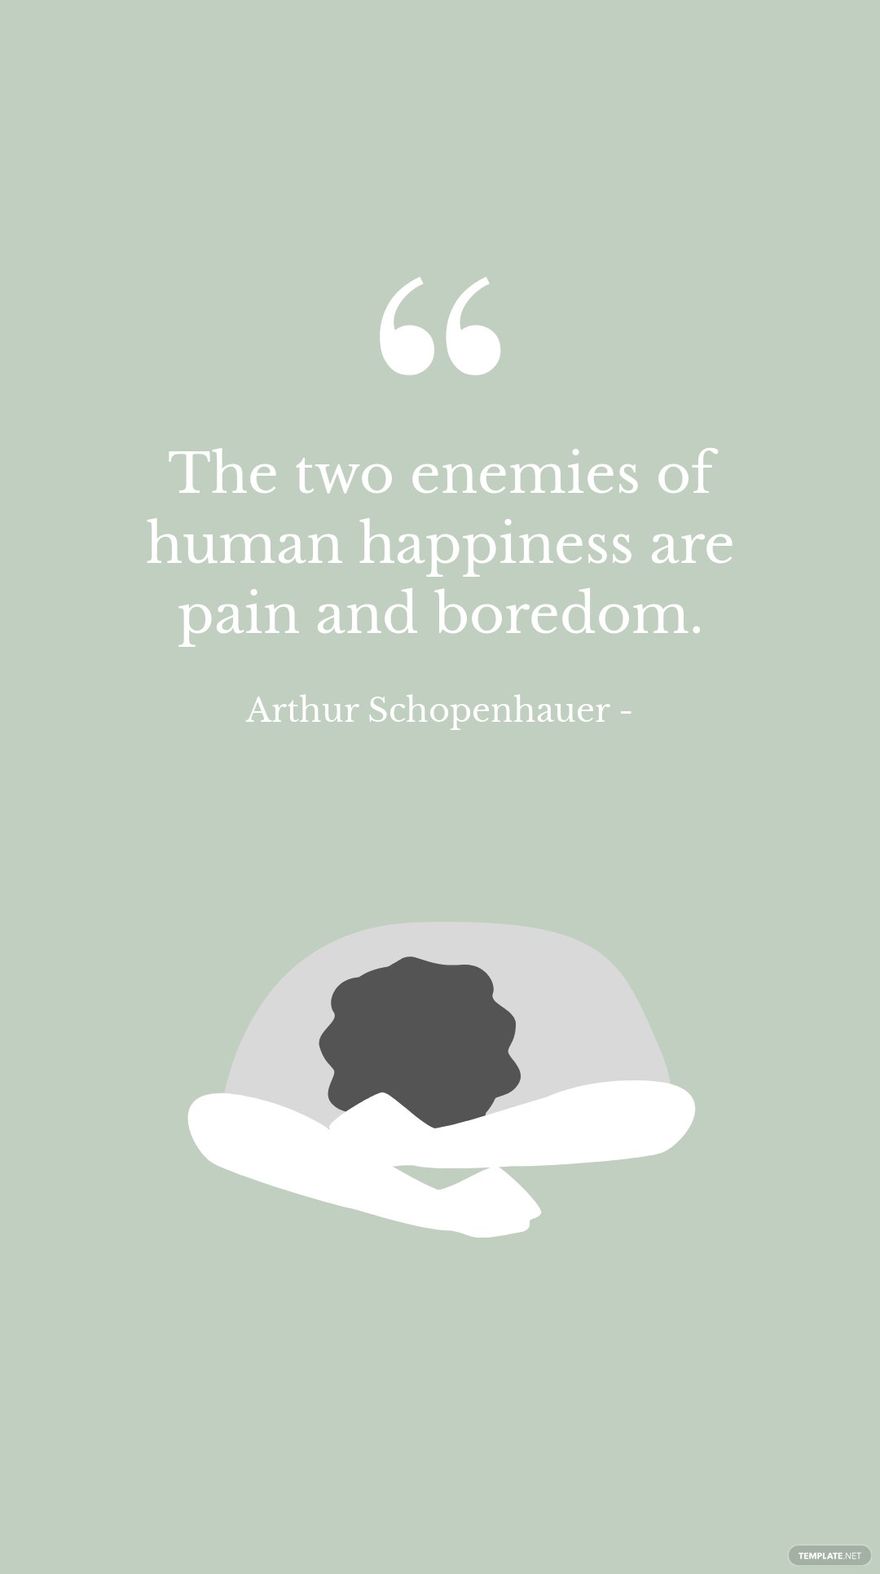 Free Arthur Schopenhauer - The two enemies of human happiness are pain and boredom.